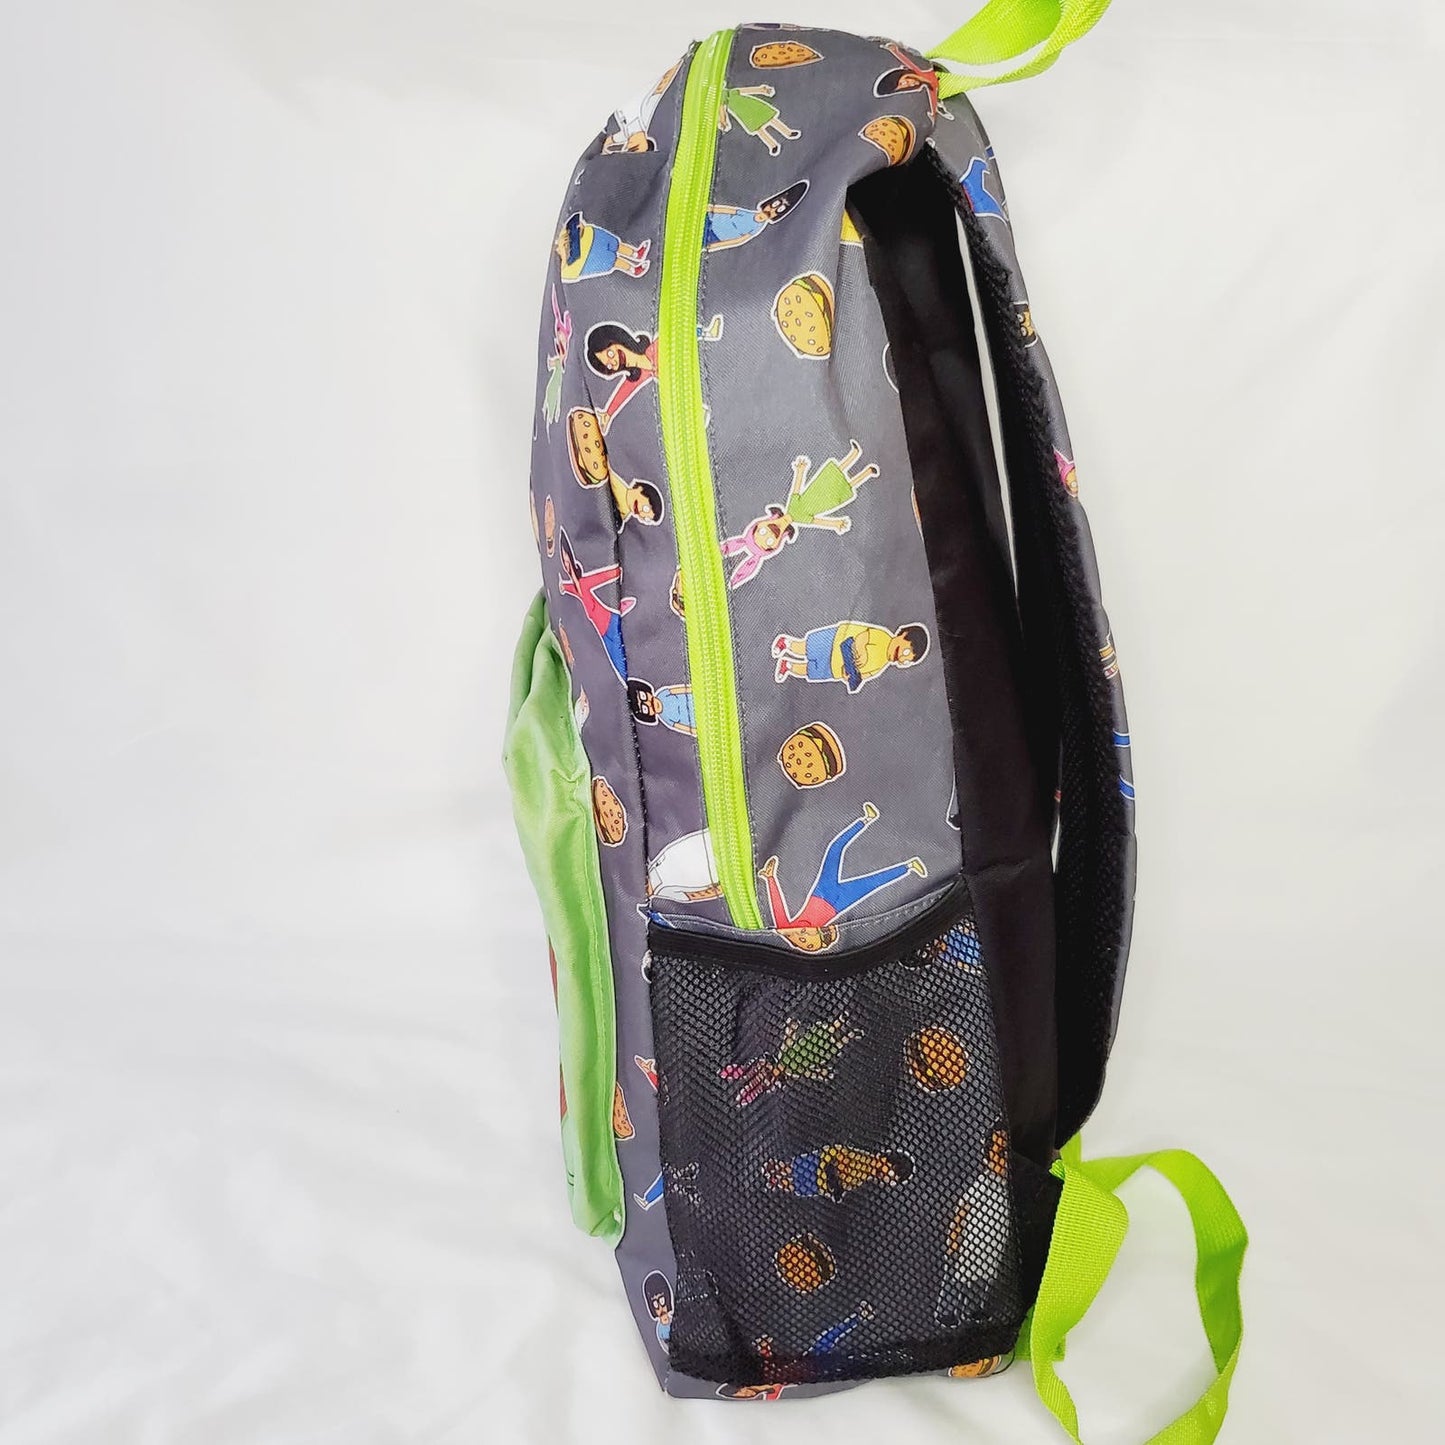 Bob's Burgers Store Front Backpack Durable w/2 Side Pockets & Laptop Sleeve - LNew